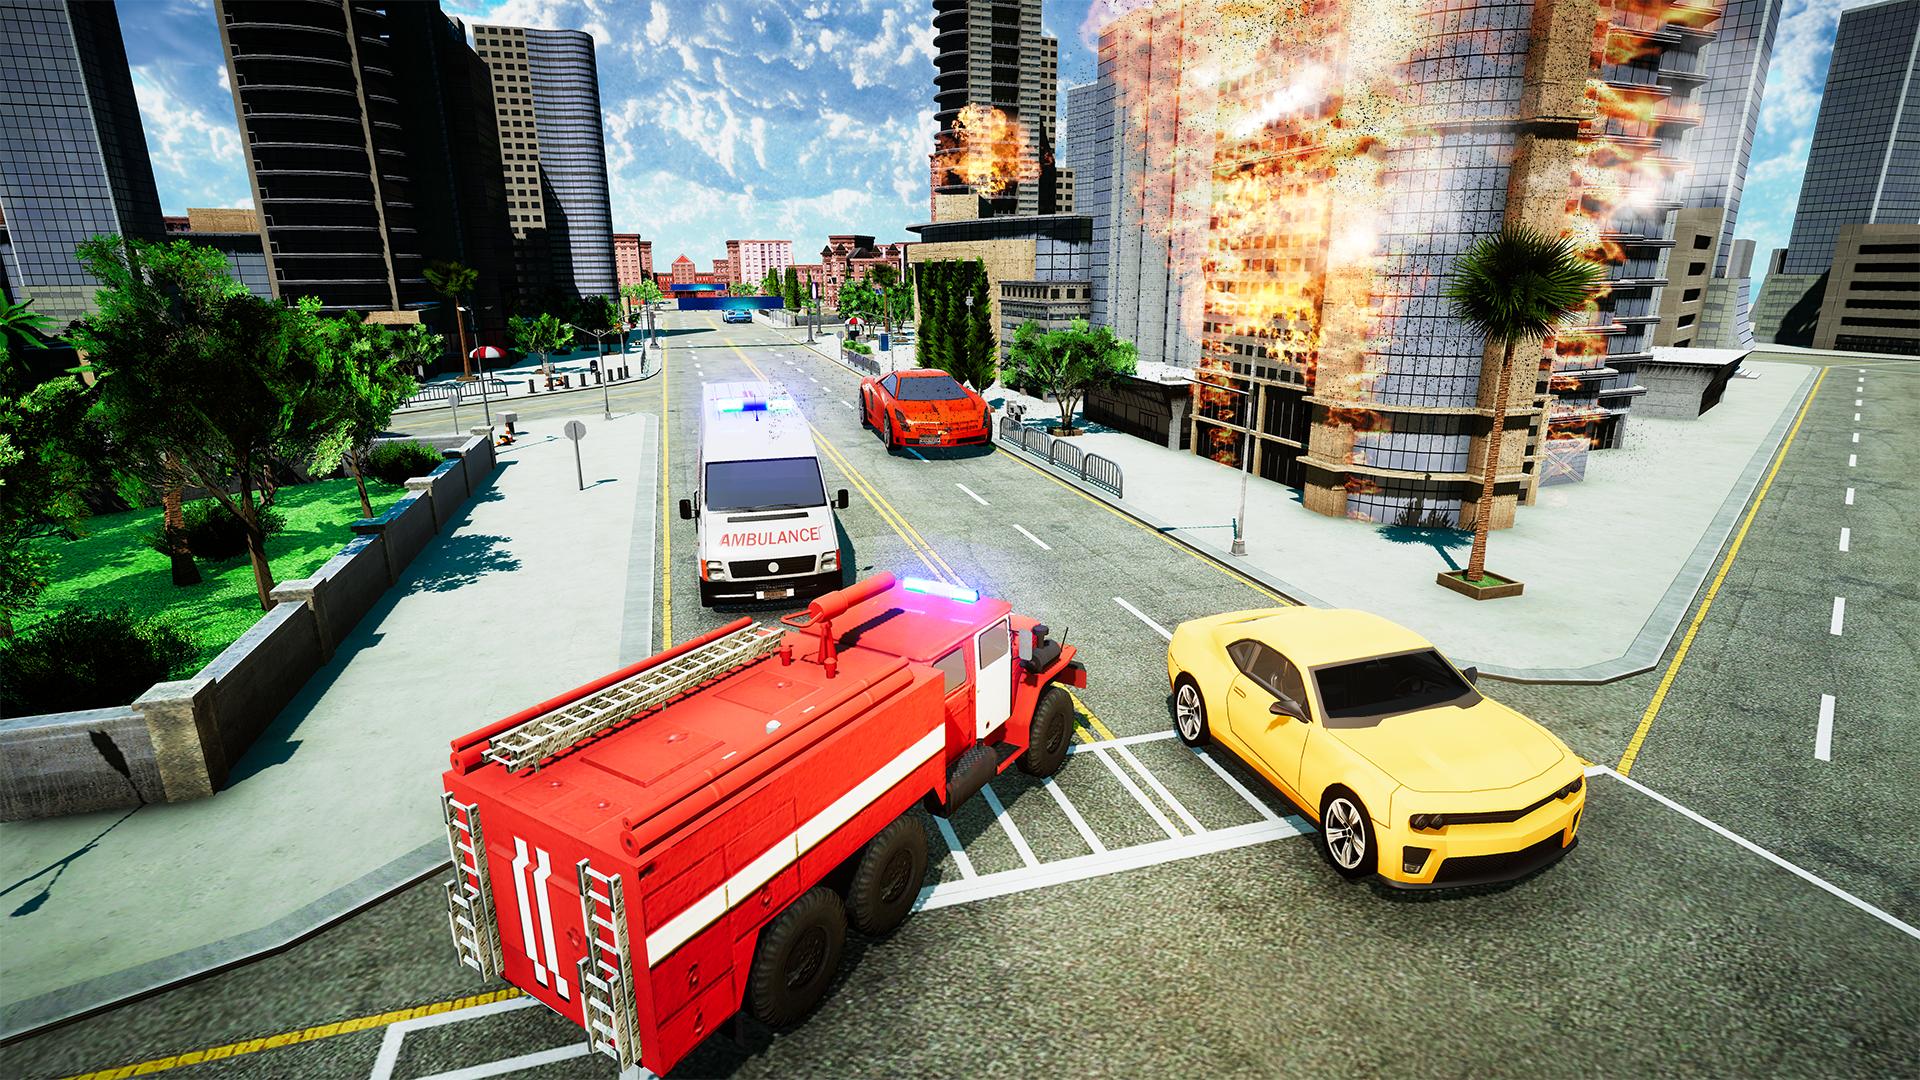 New York City Firefighter Truck Simulator 2020 For Android Apk Download - 1 fire fighting simulator roblox roblox firefighter game design